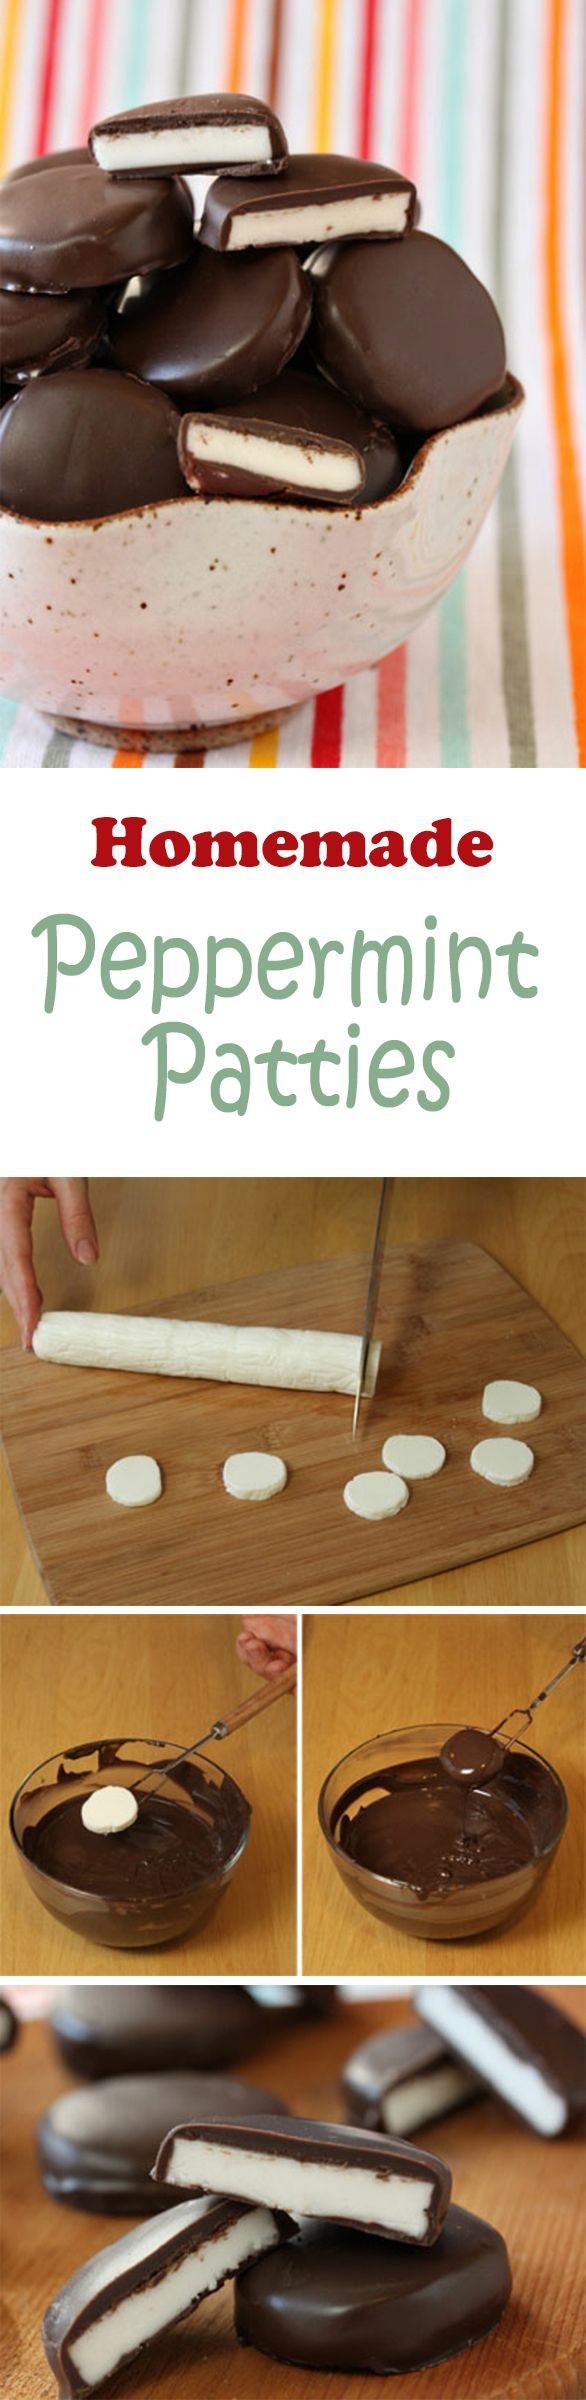 In the realm of knock-off candy recipes, peppermint patties are one of the easiest candies to make. With j